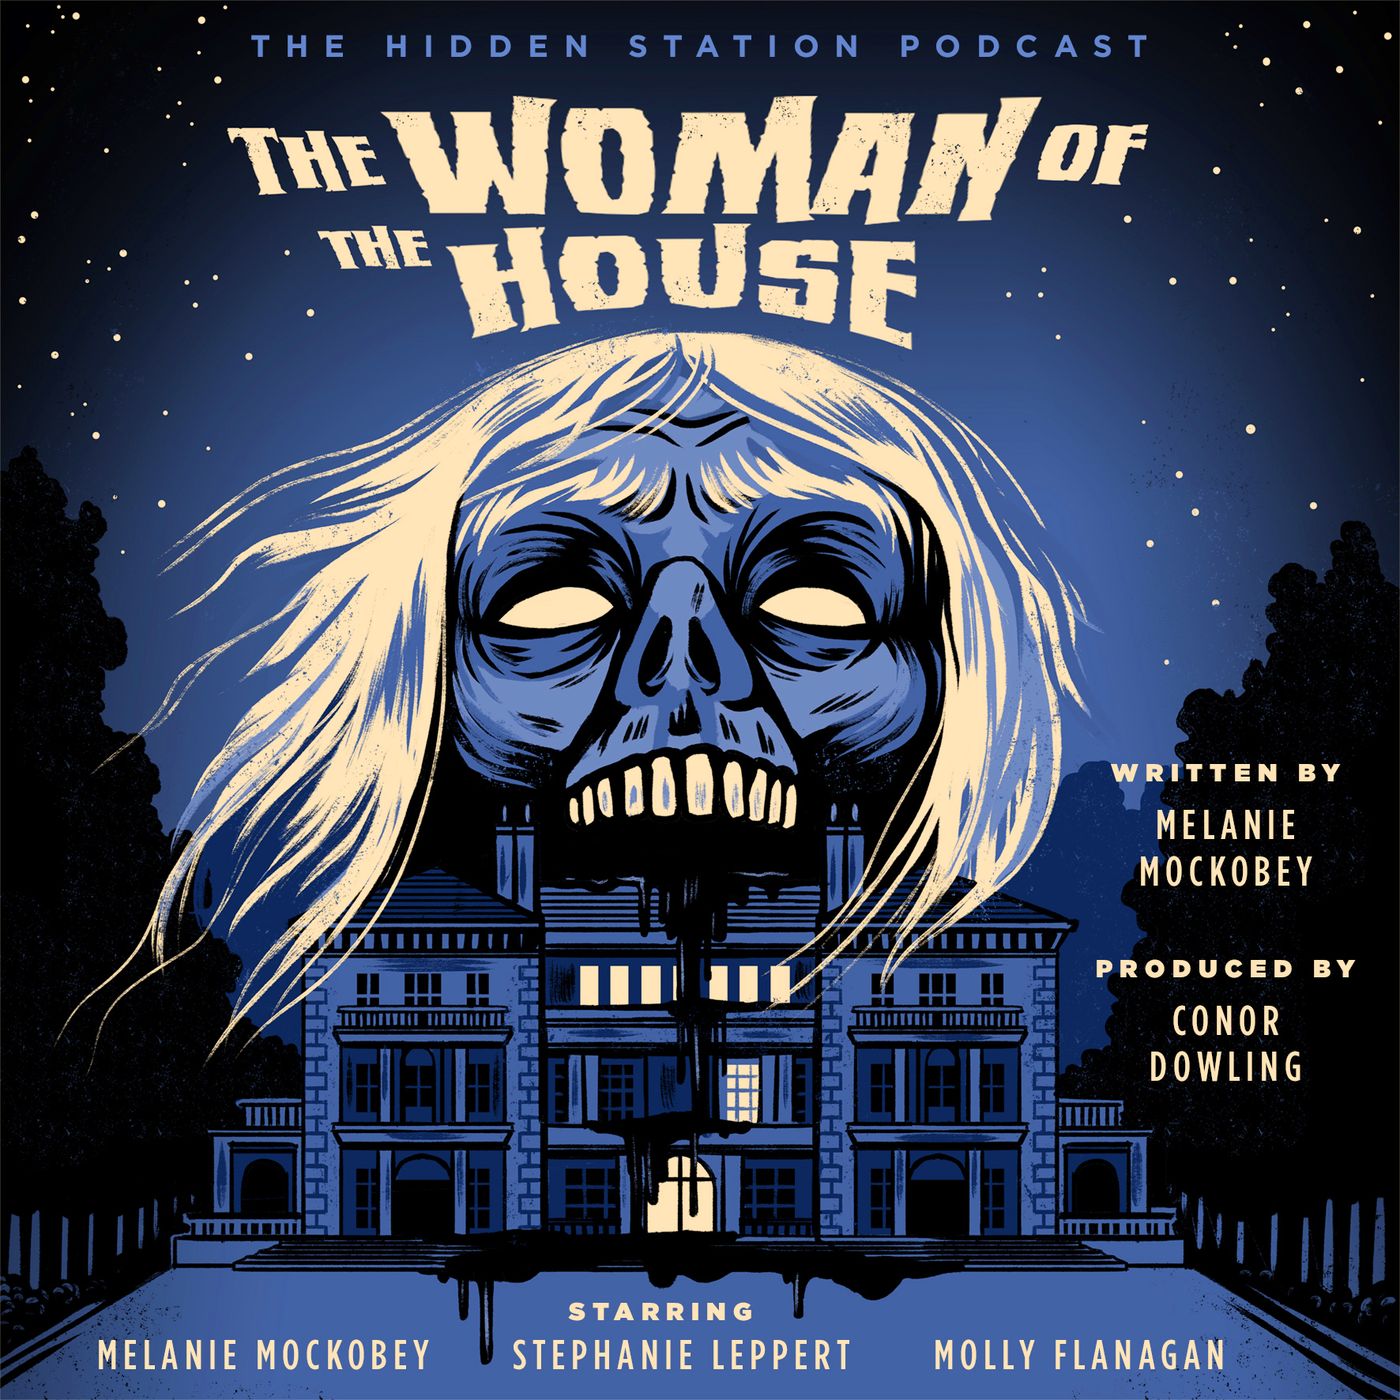 The Woman of The House by Melanie Mockobey